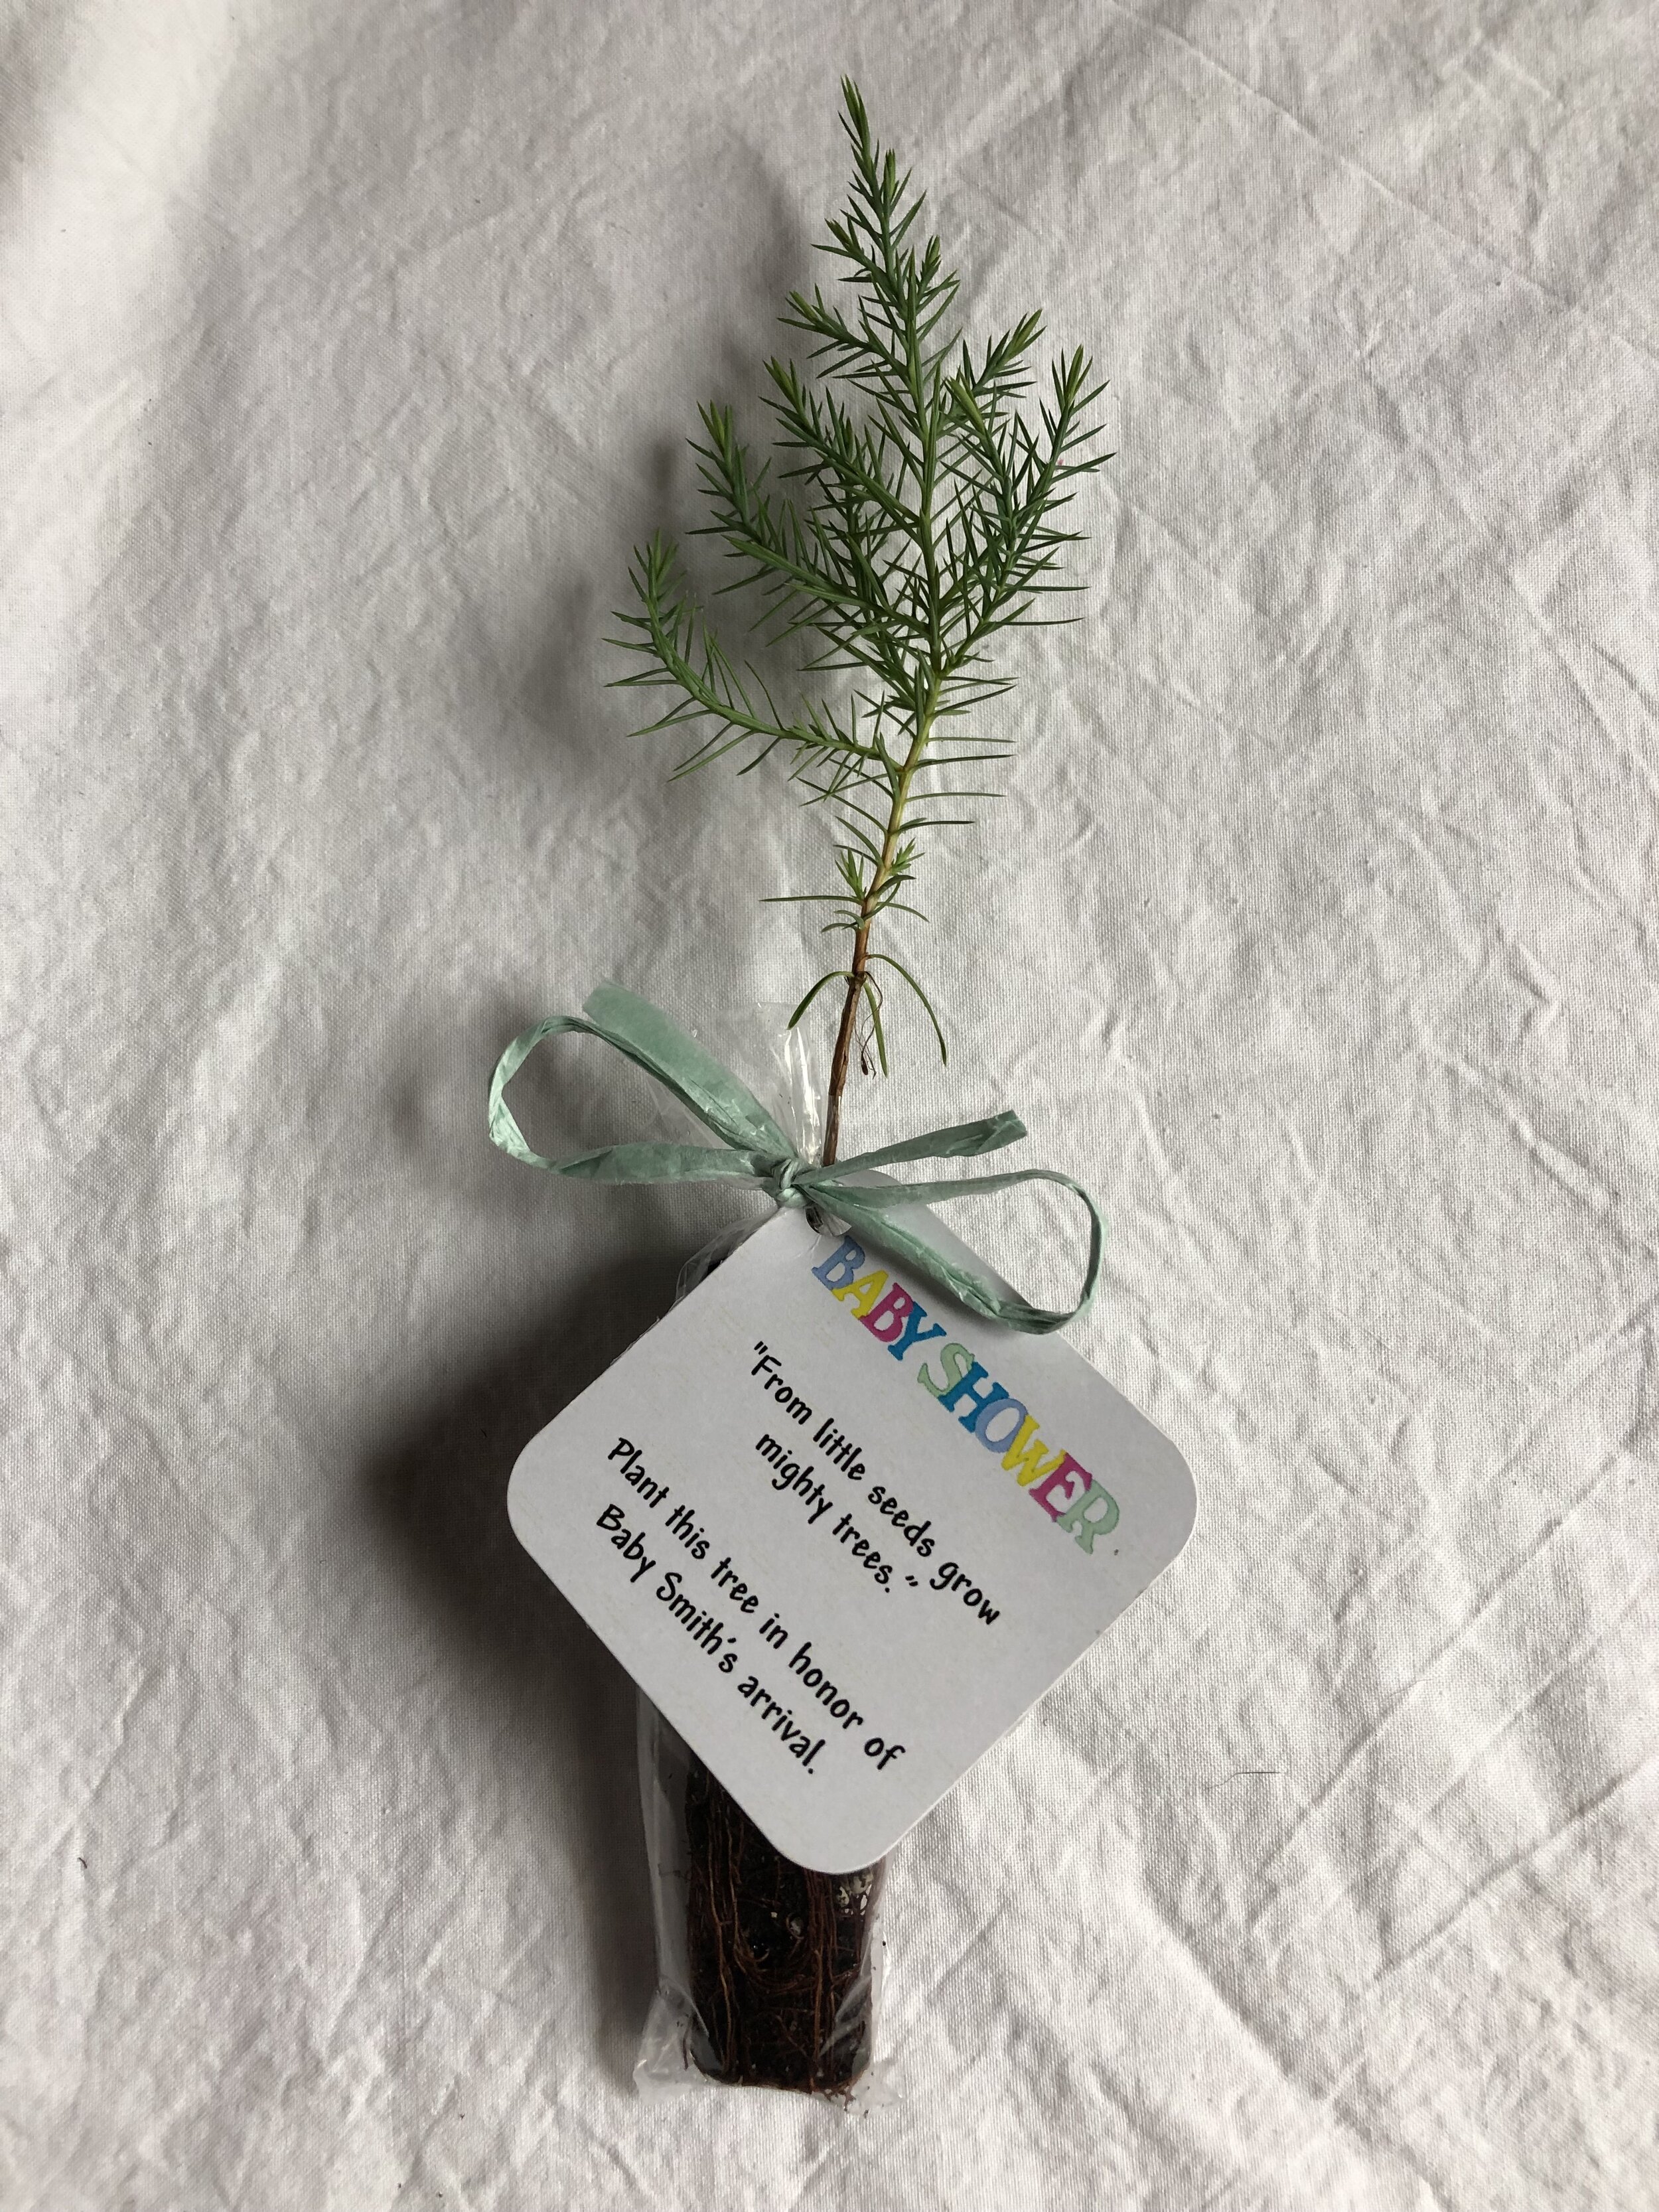 Tree Seedling with Personalized tag tied with Raffia Ribbon